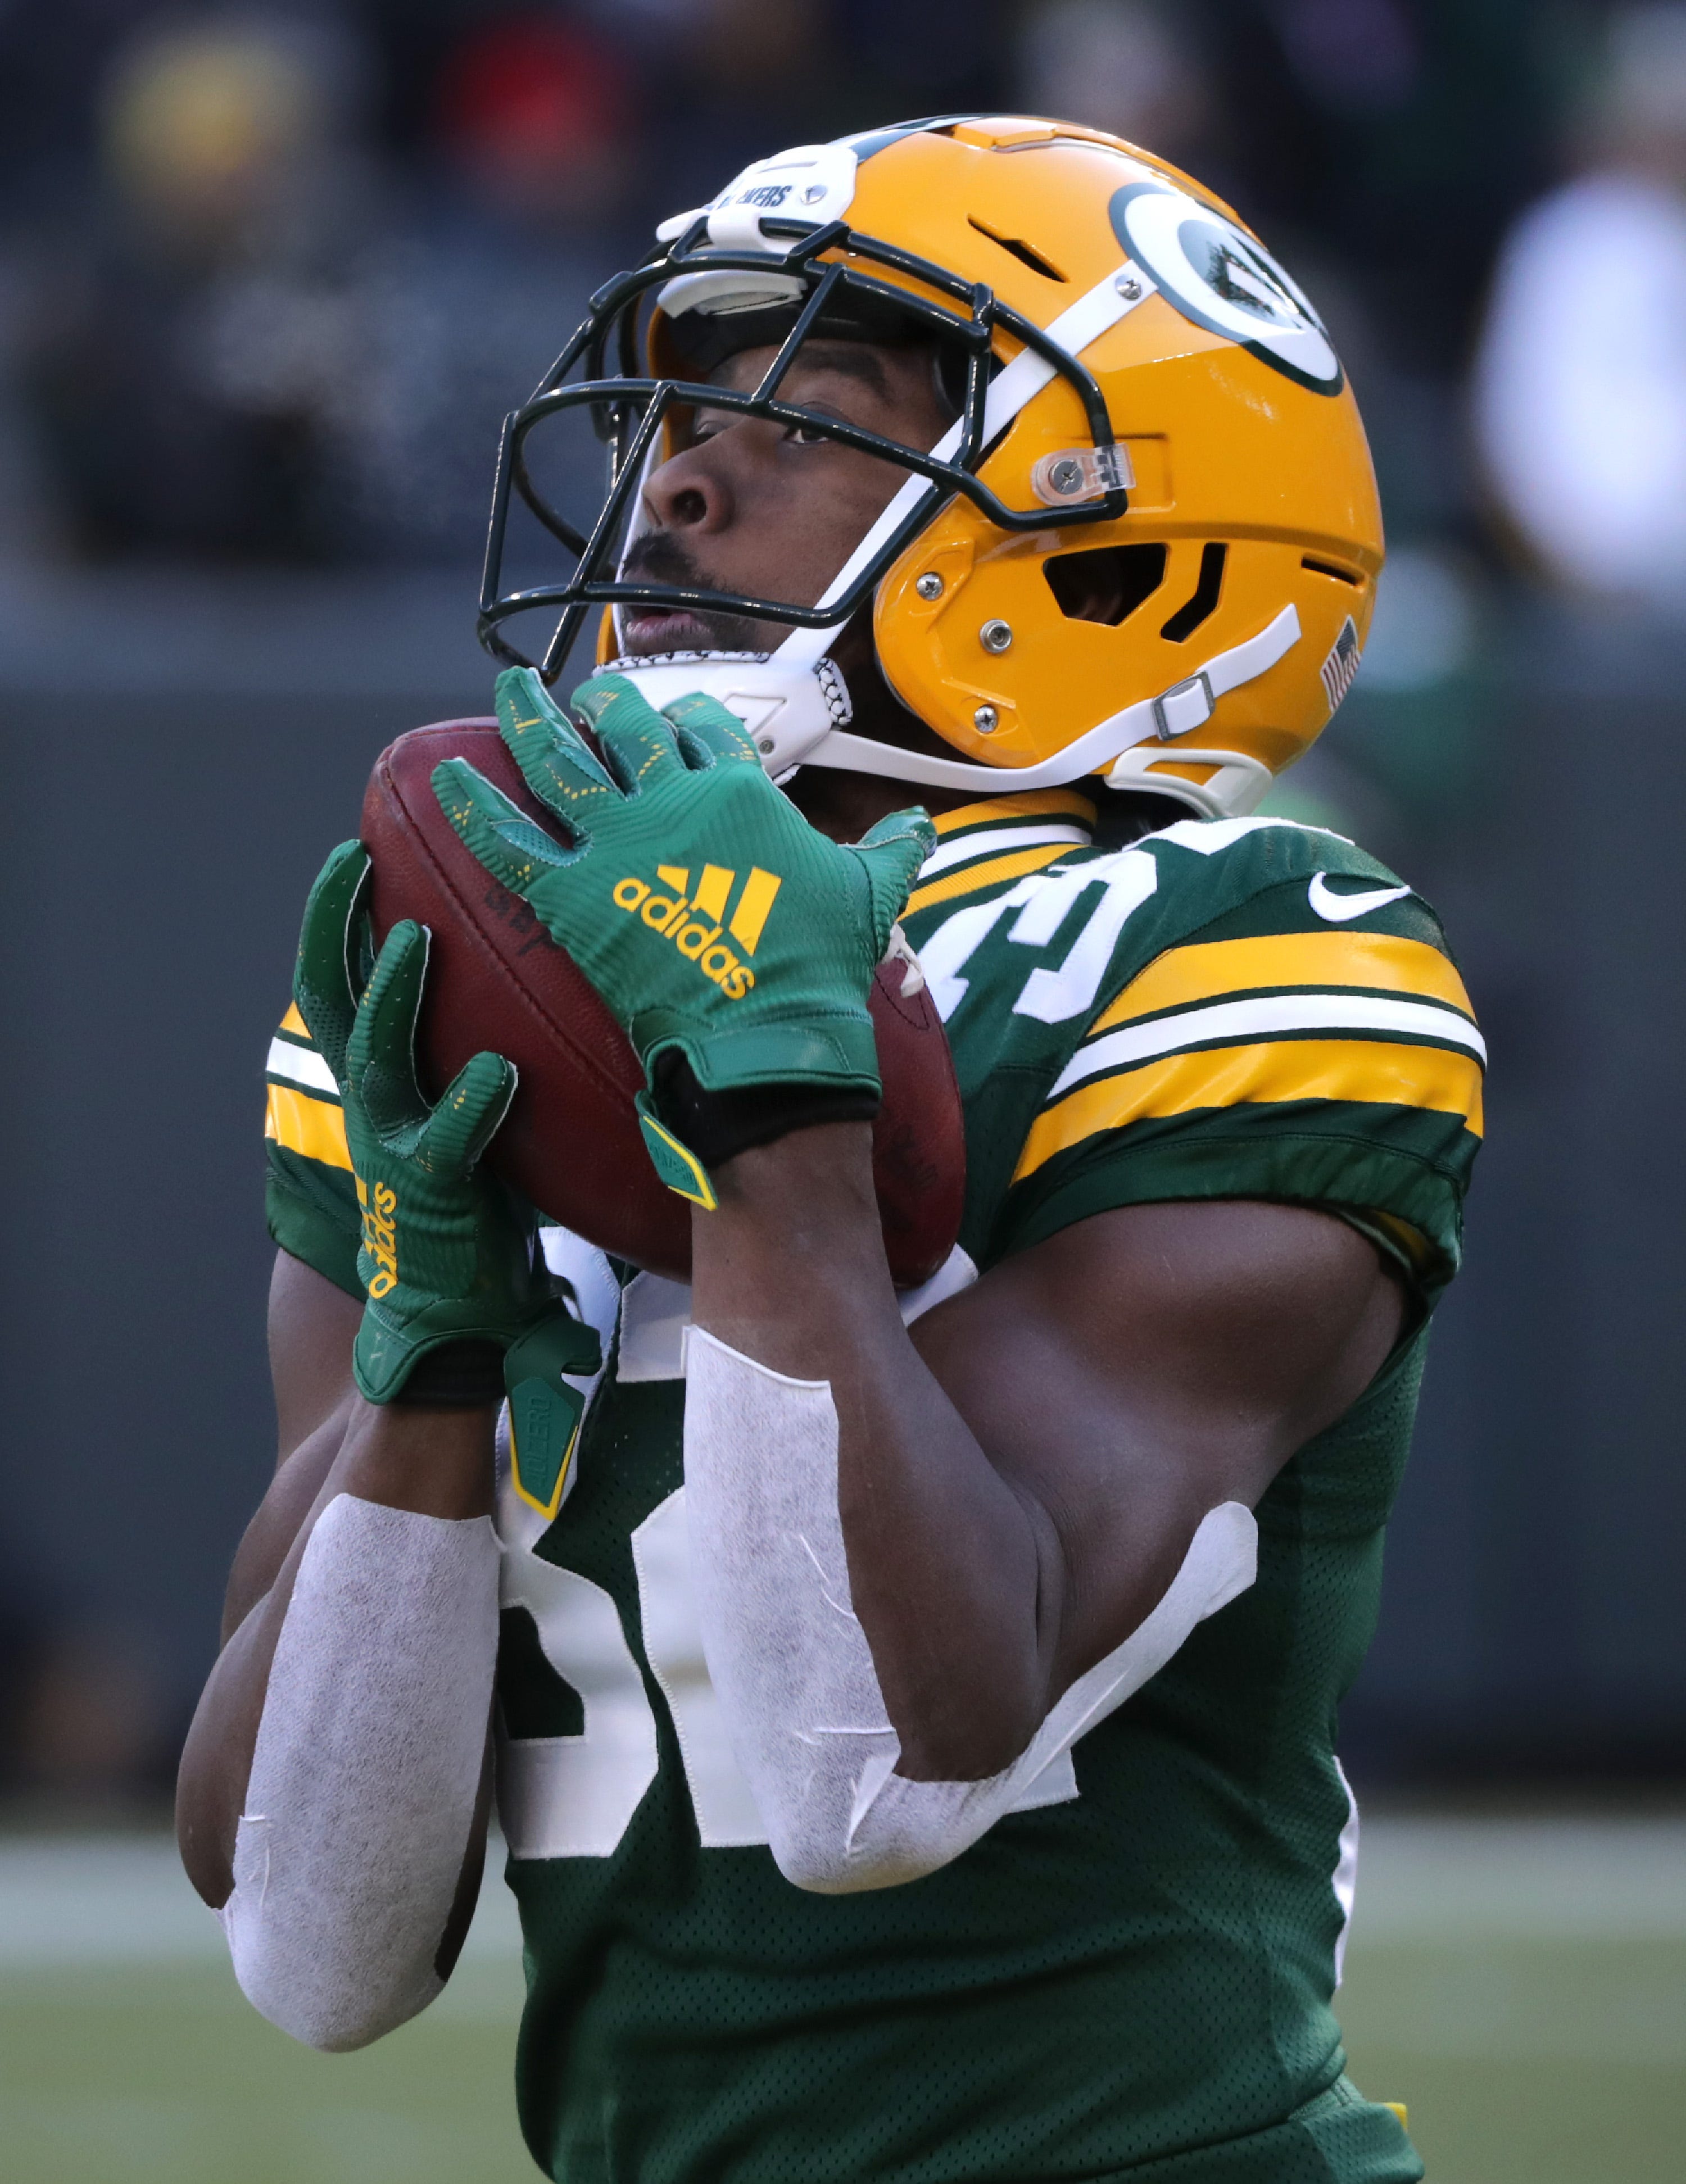 Green Bay Packers running back Tyler Ervin (32) warms up before the Packers host the Chicago Bears on Sunday, December 15, 2019, at Lambeau Field in Green Bay, Wis.